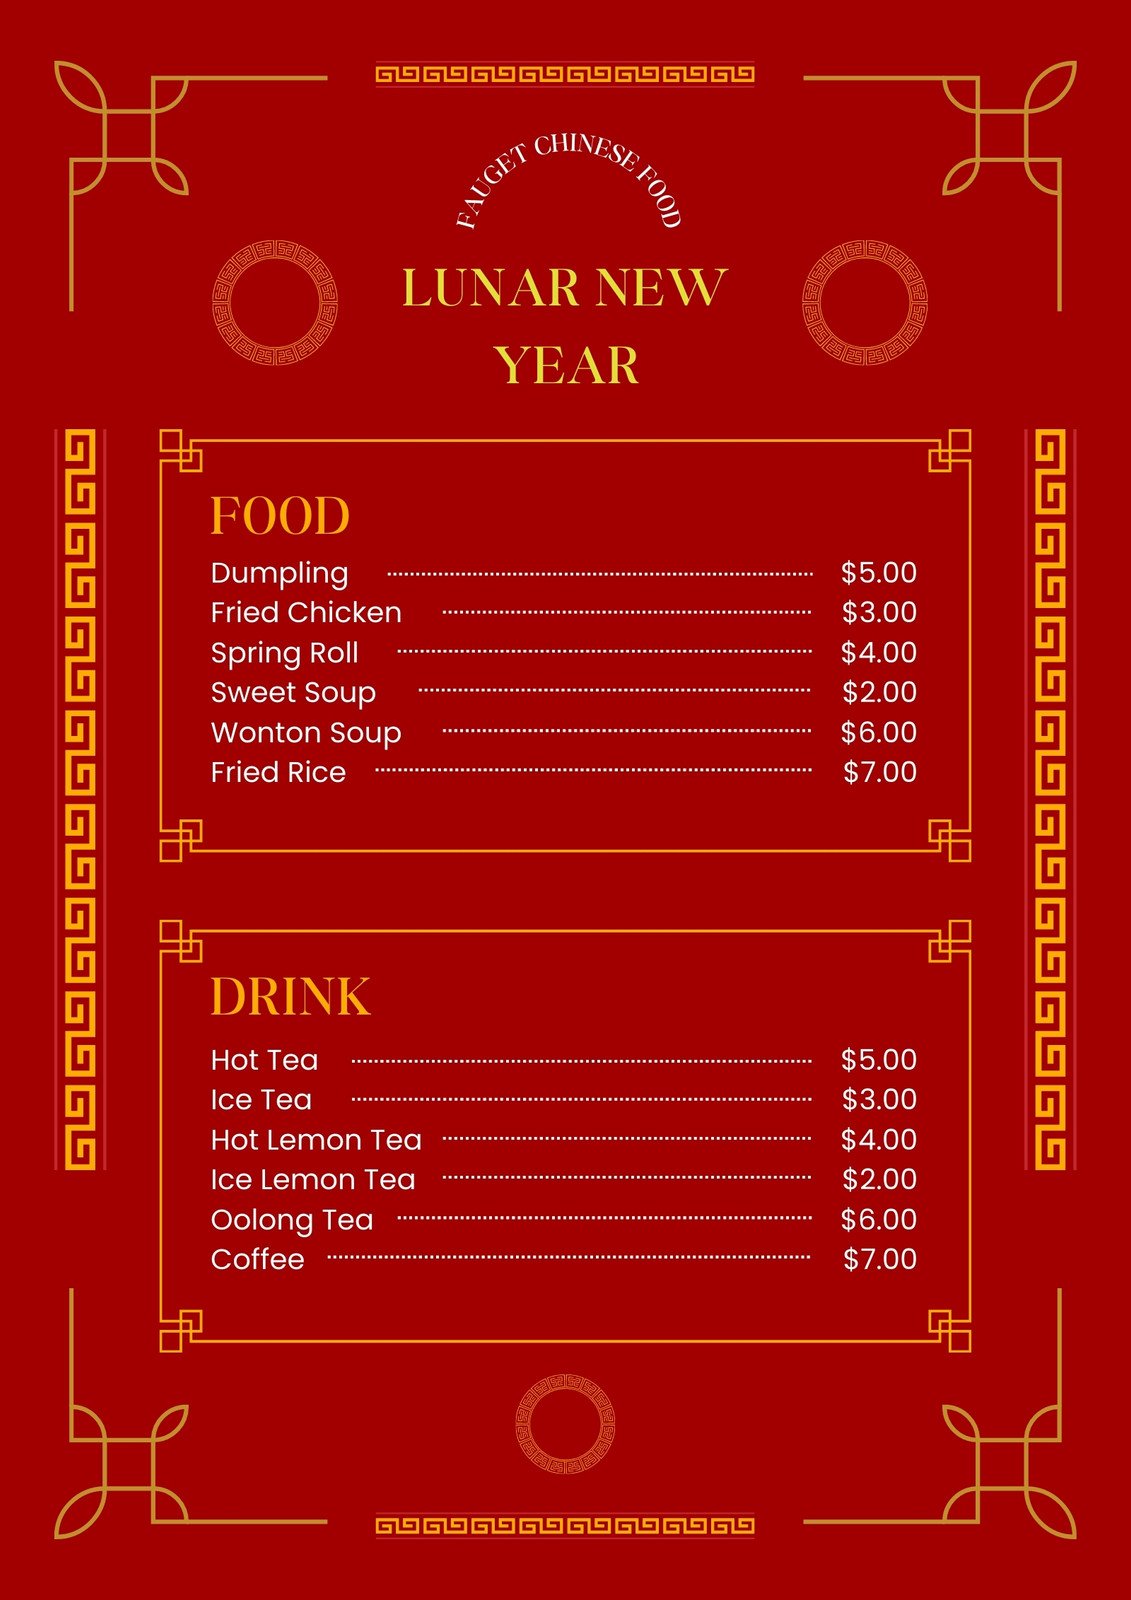 Tết Nguyên Đán is fast approaching and we know you want to make your restaurant stand out and attract more customers. That\'s why we have prepared free Lunar New Year menu templates for you! Our designs are eye-catching and reflect the joy and prosperity of the holiday. Download them now and make your menu shine! 